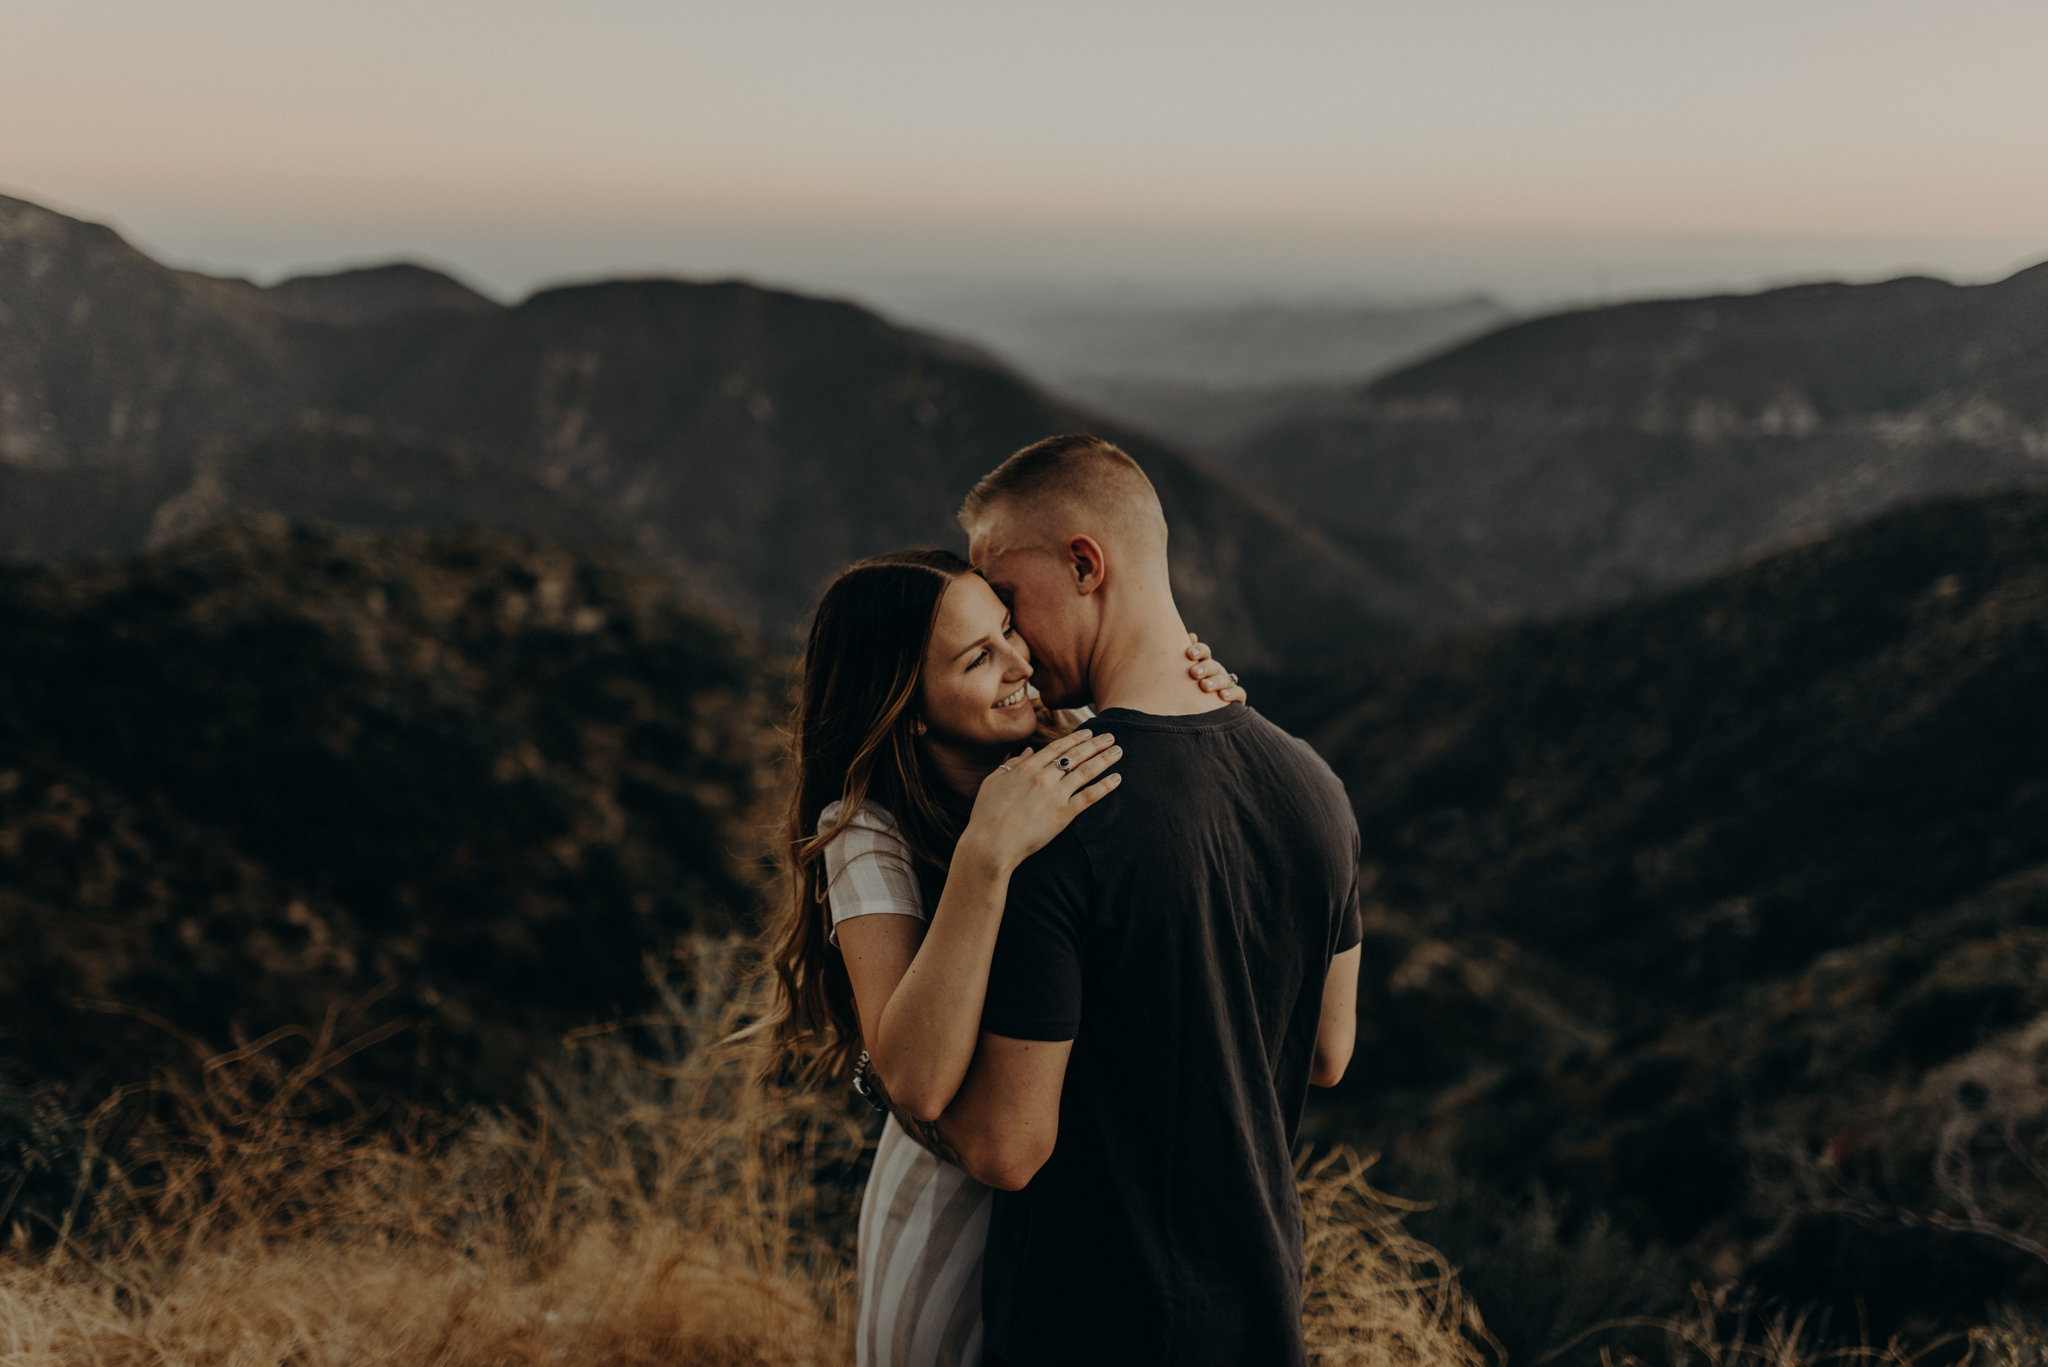 Isaiah + Taylor Photography - Los Angeles Forest Engagement Session - Laid back wedding photographer-014.jpg